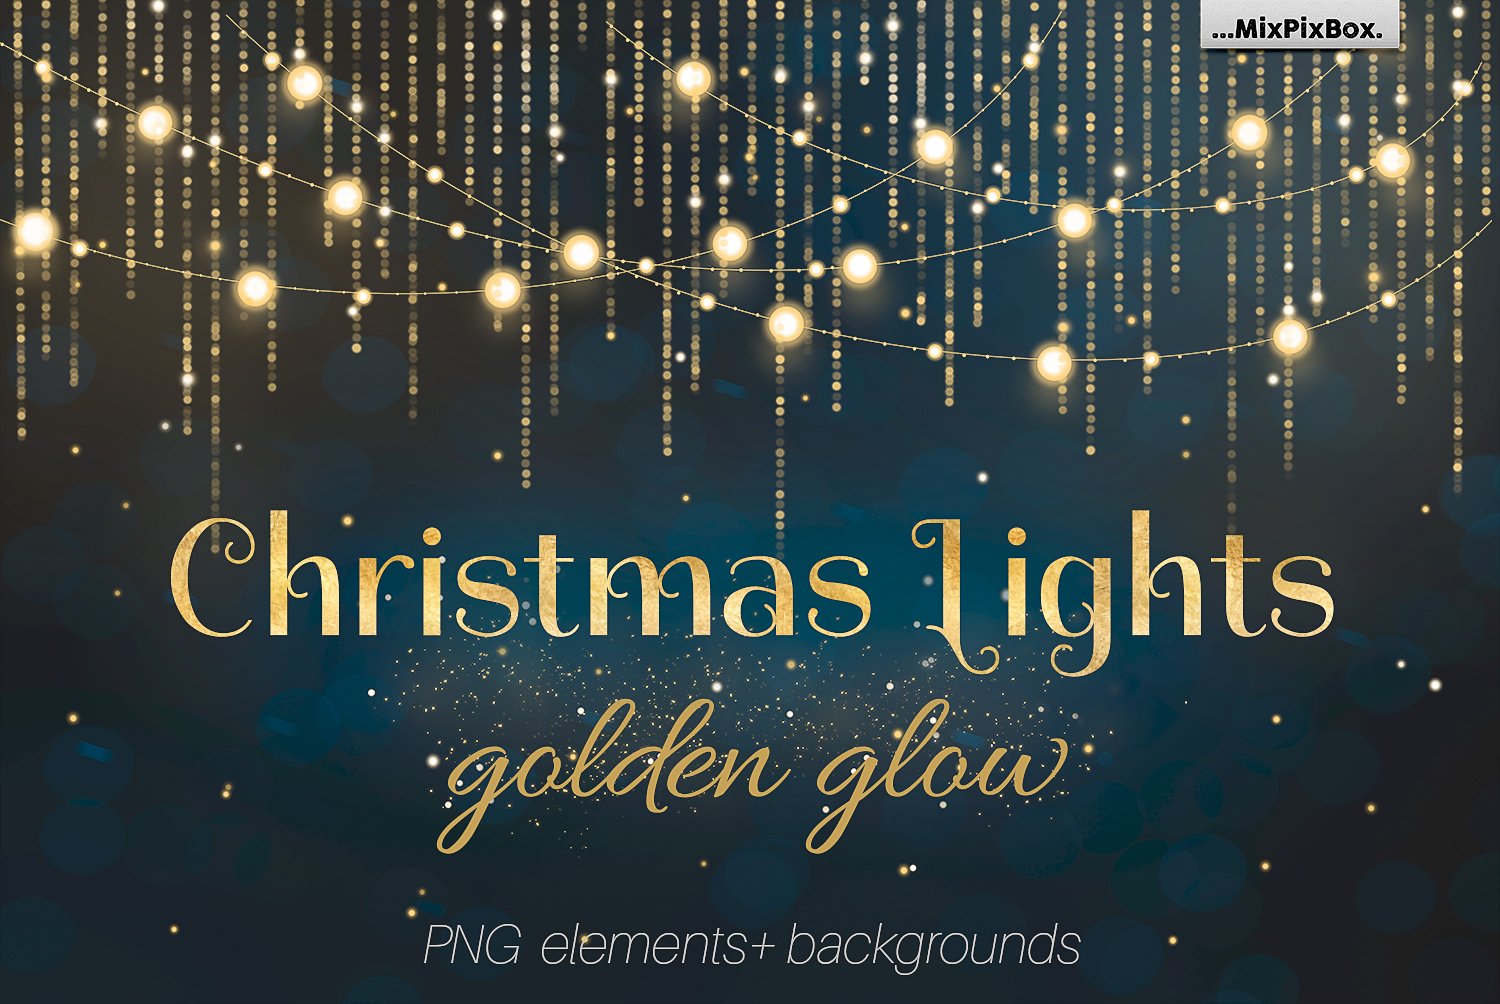 Christmas Lights Golden Glowcover image.